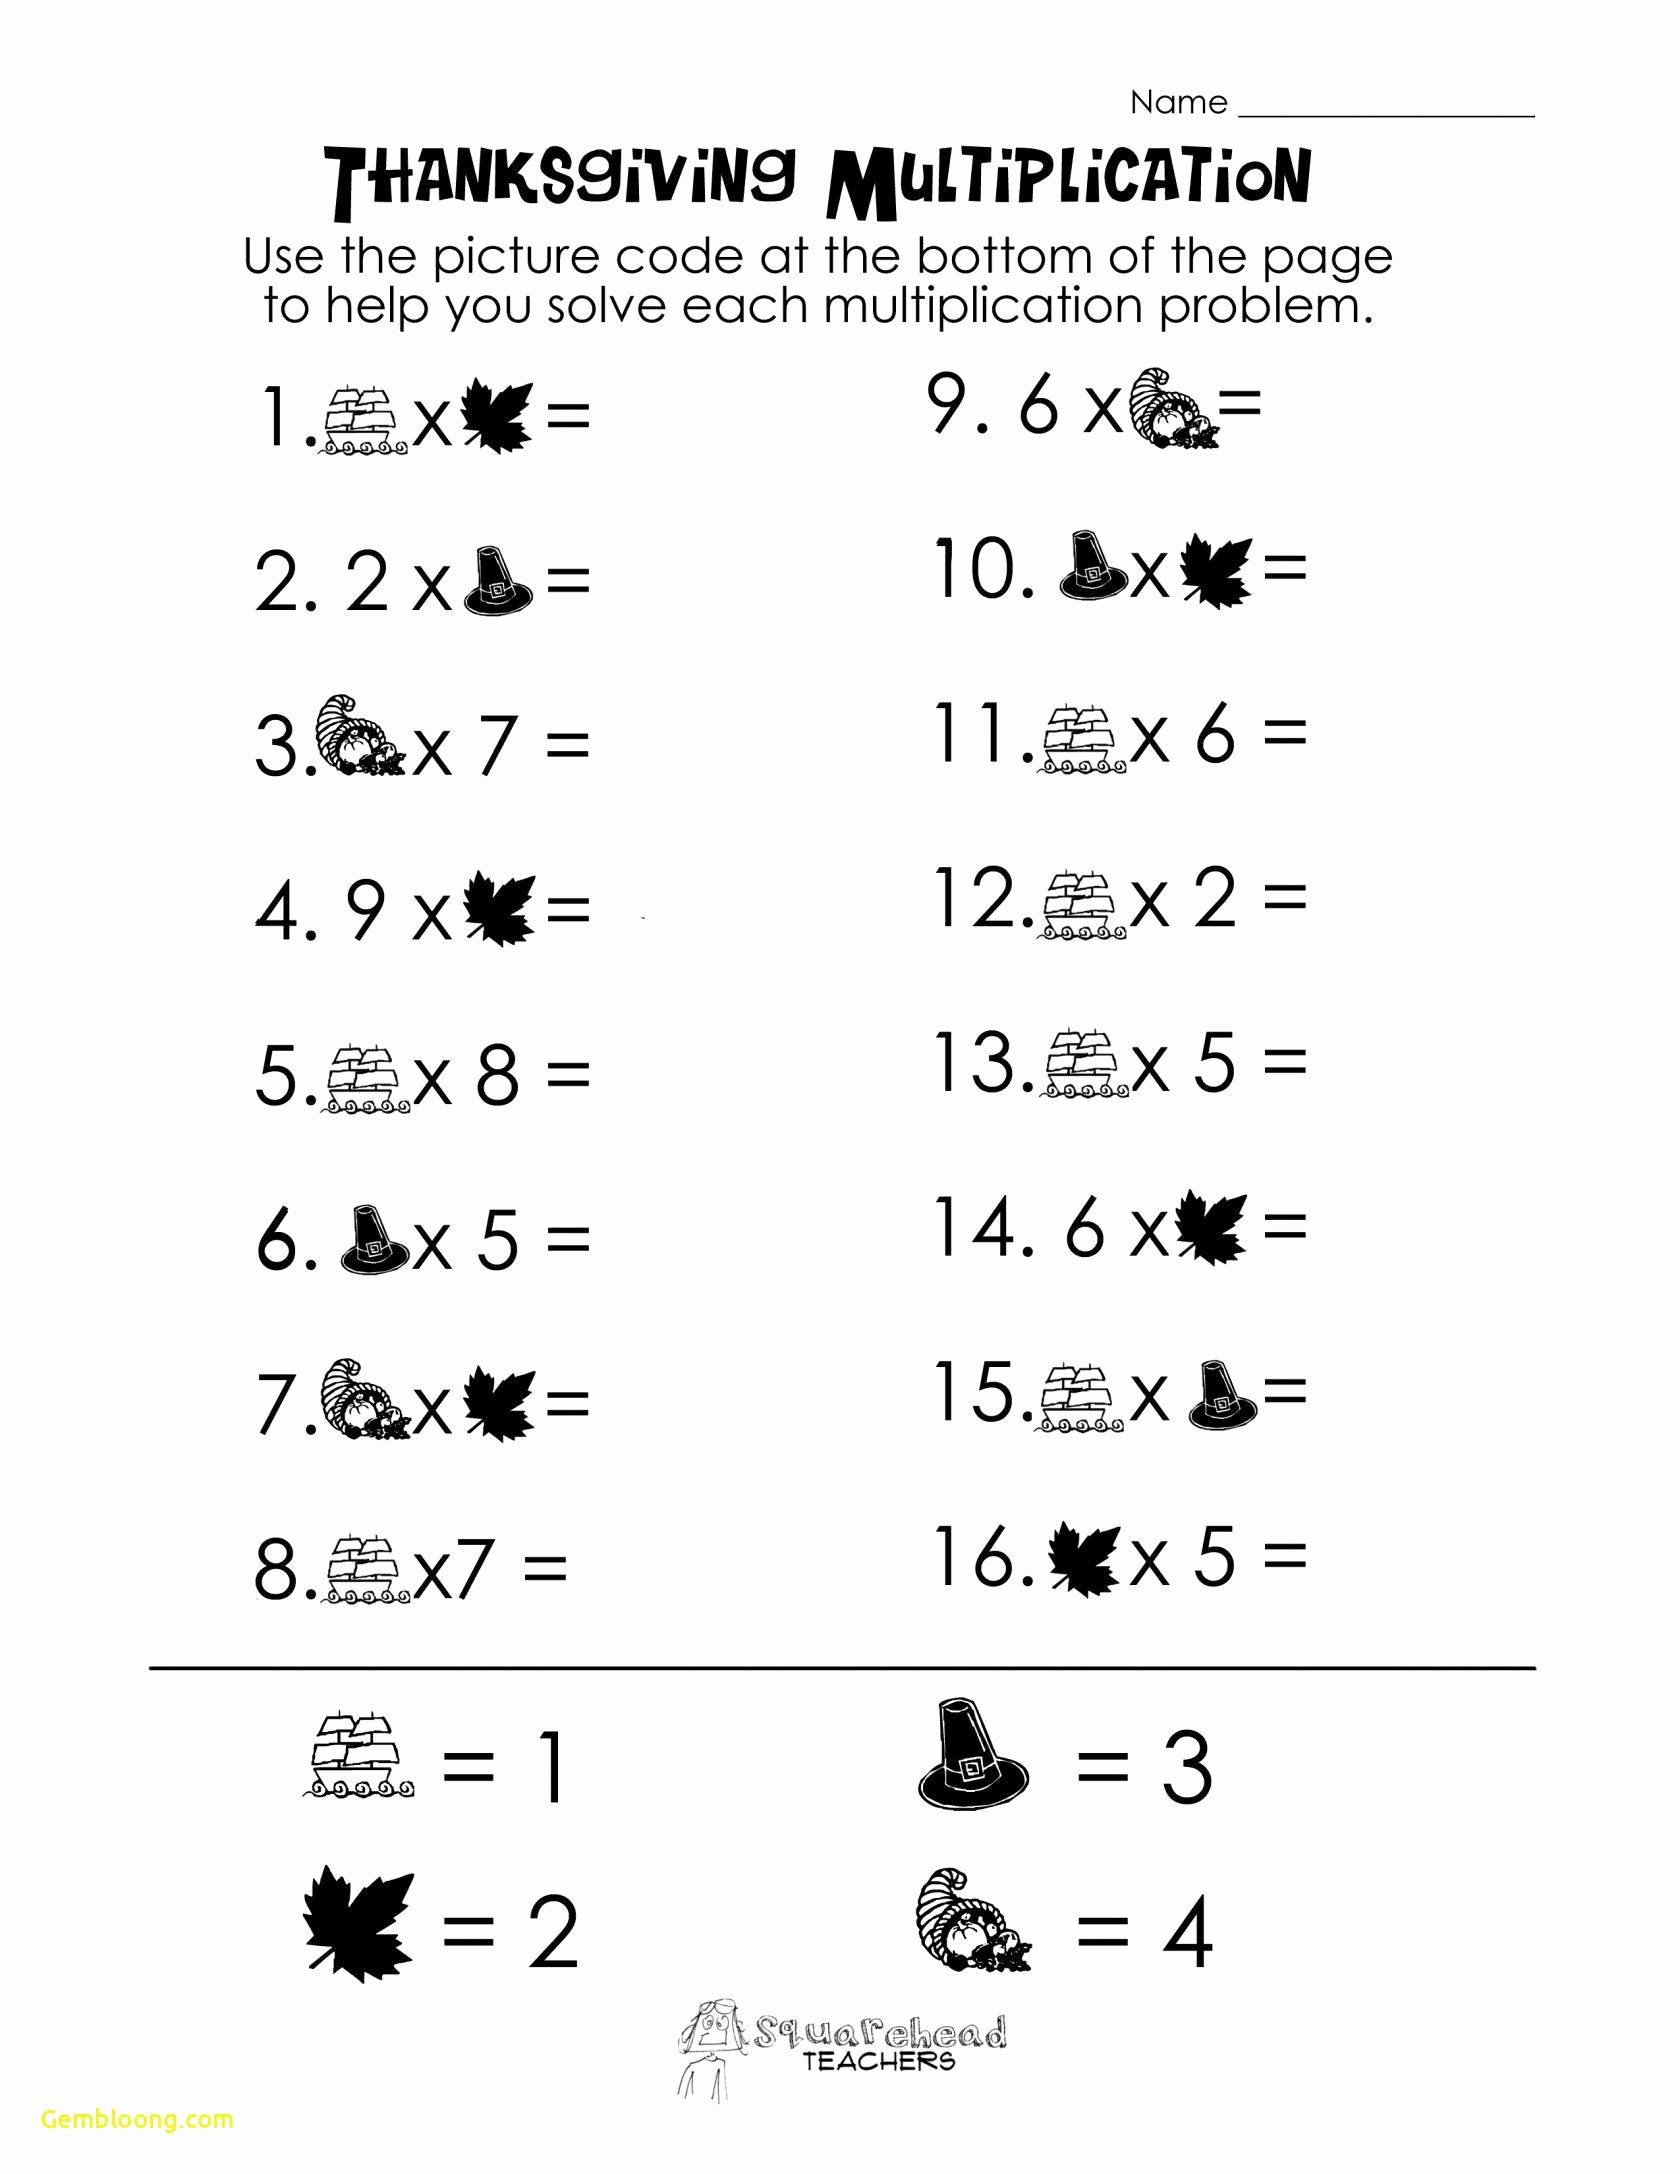 Arithmetic Sequence Worksheet with Answers Awesome Geometric Sequences and Series Worksheet Answers